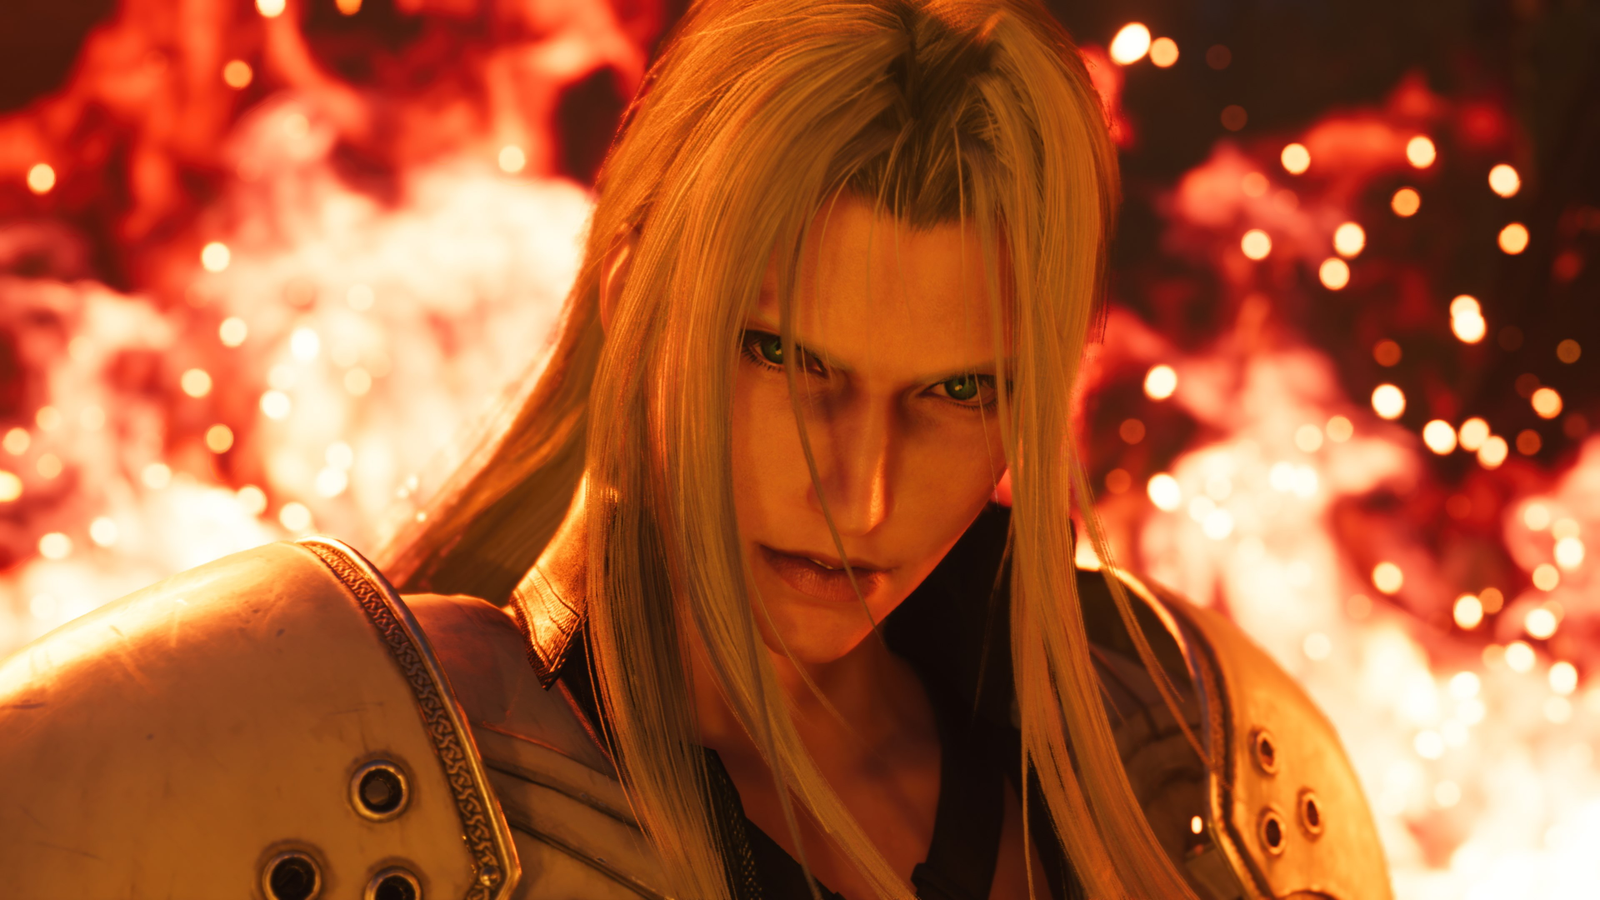 Final Fantasy 7 Rebirth review - an overstuffed but lovable re-imagining